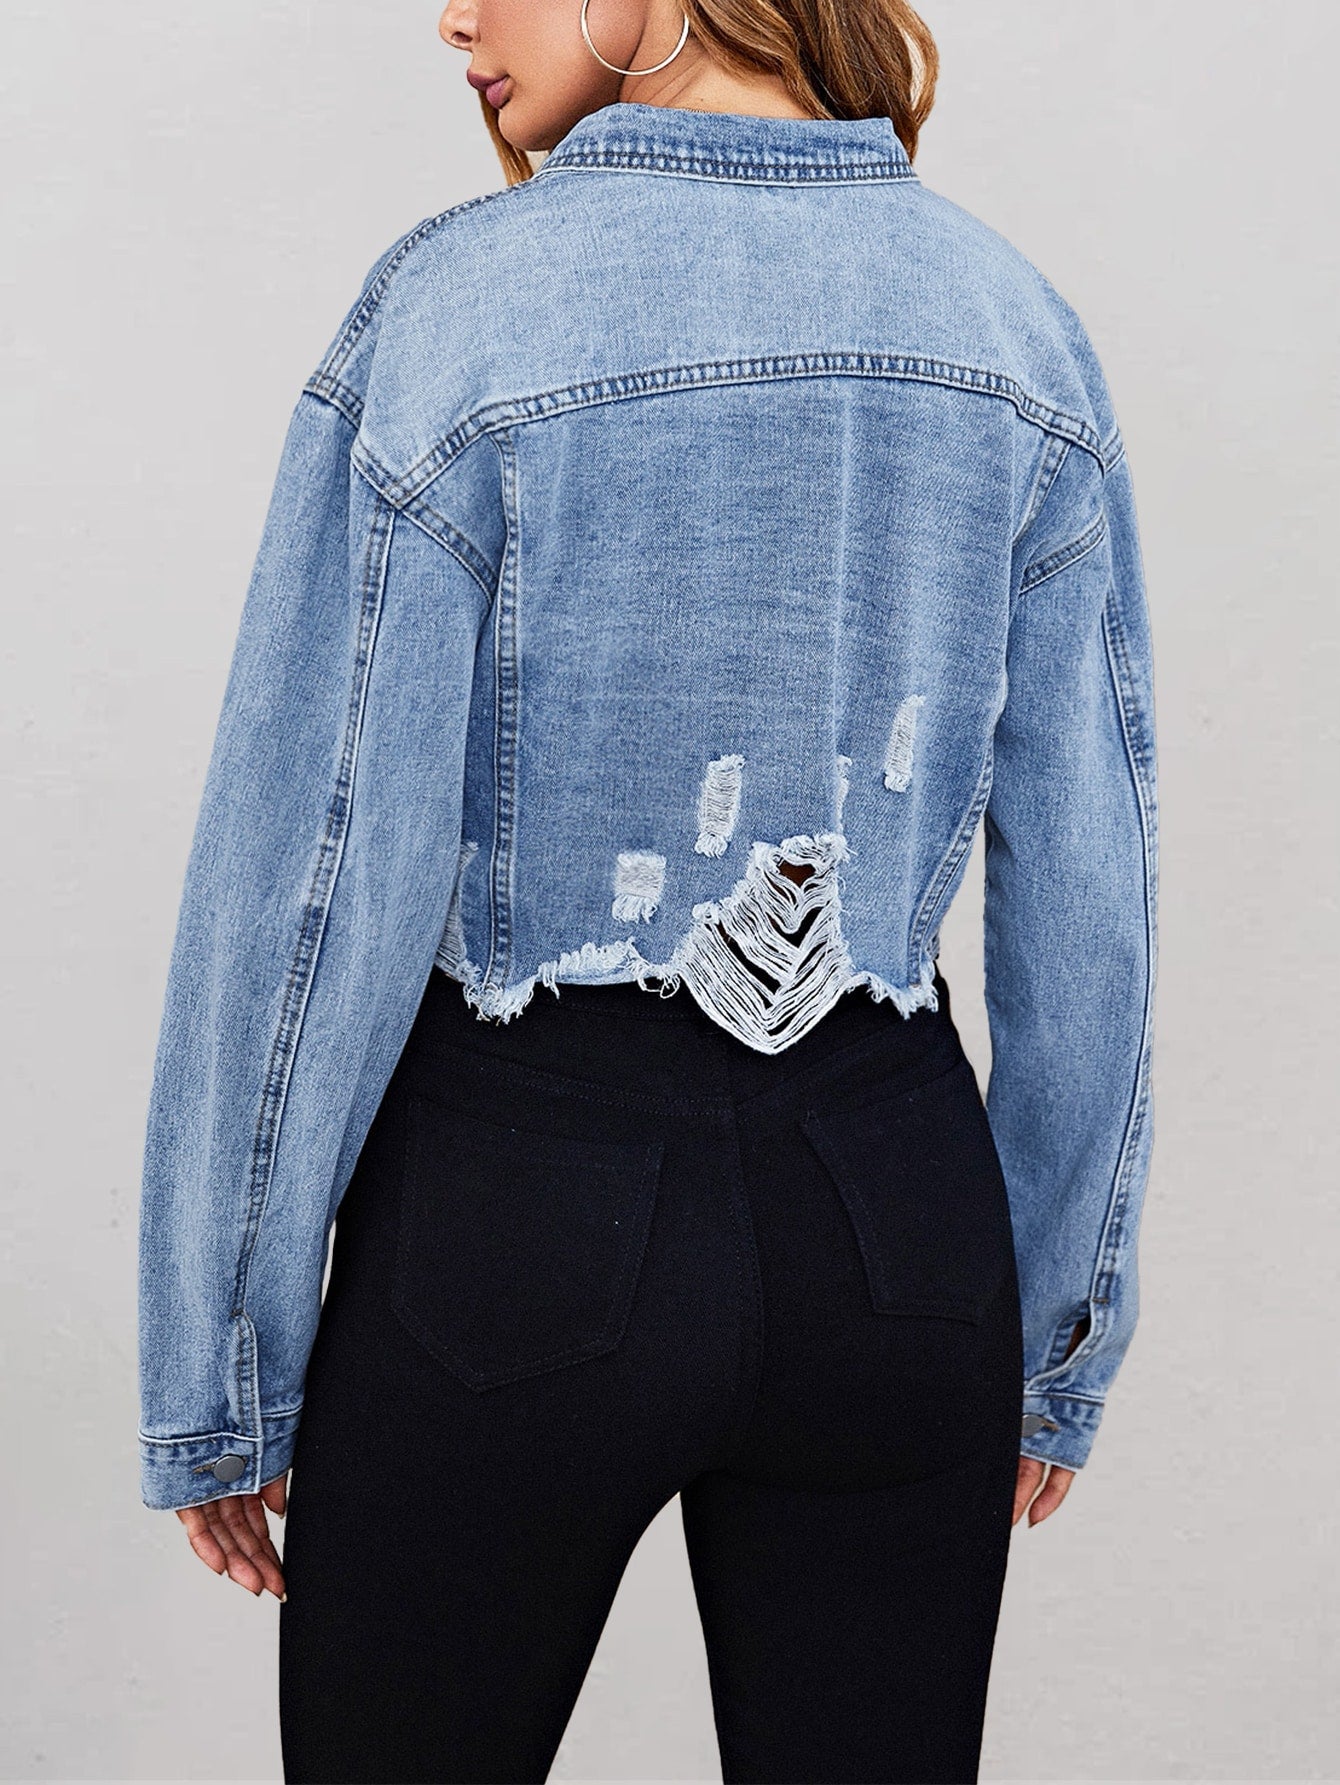 Chic Pearl Embellished Denim Jacket with Raw Hem - Embrace the Sophisticated Edge